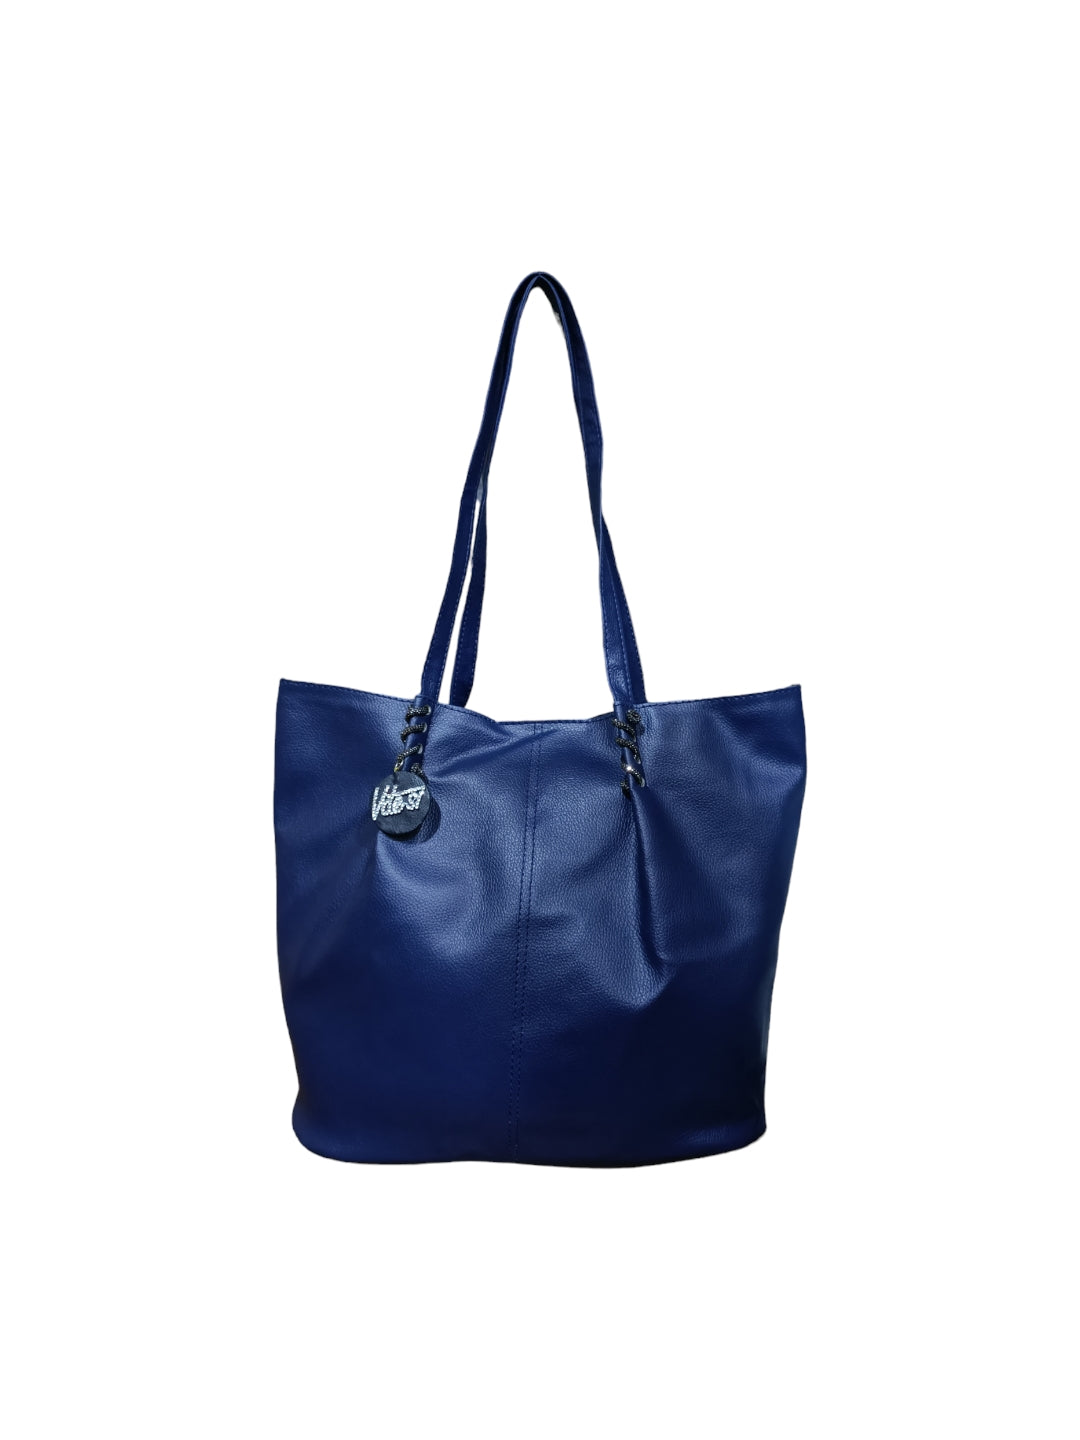 Make a statement with our stylish Tote Bag, designed for the modern woman on the go.